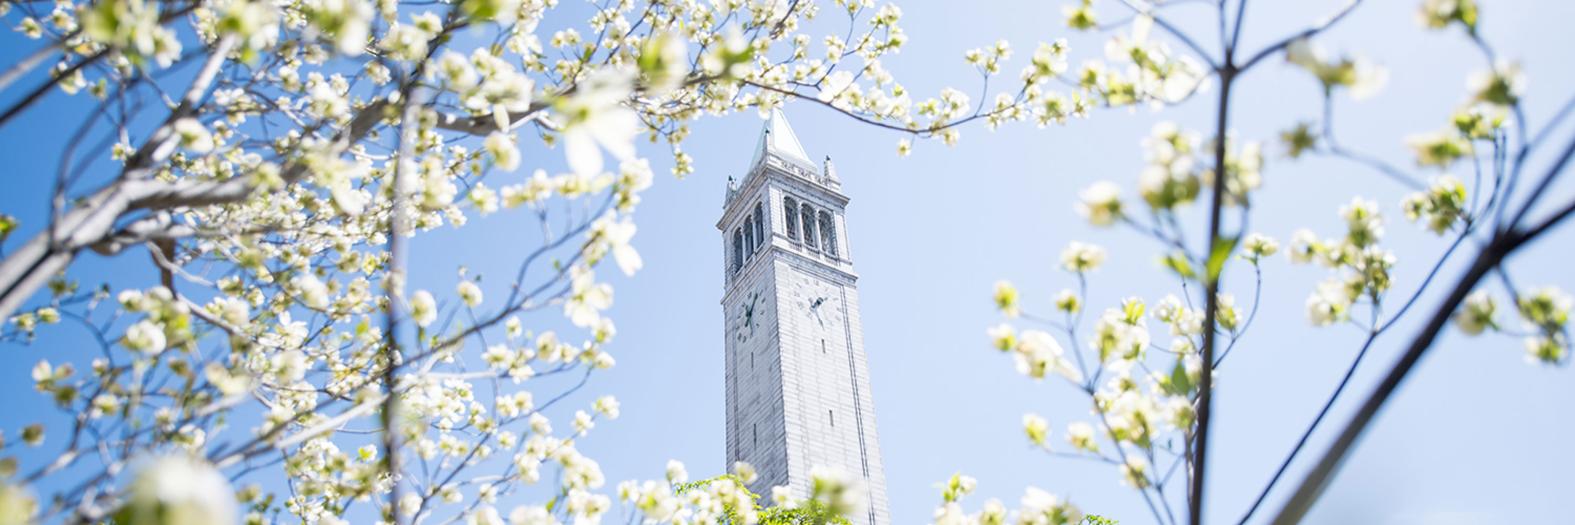 image of campanile tower with white flowers 